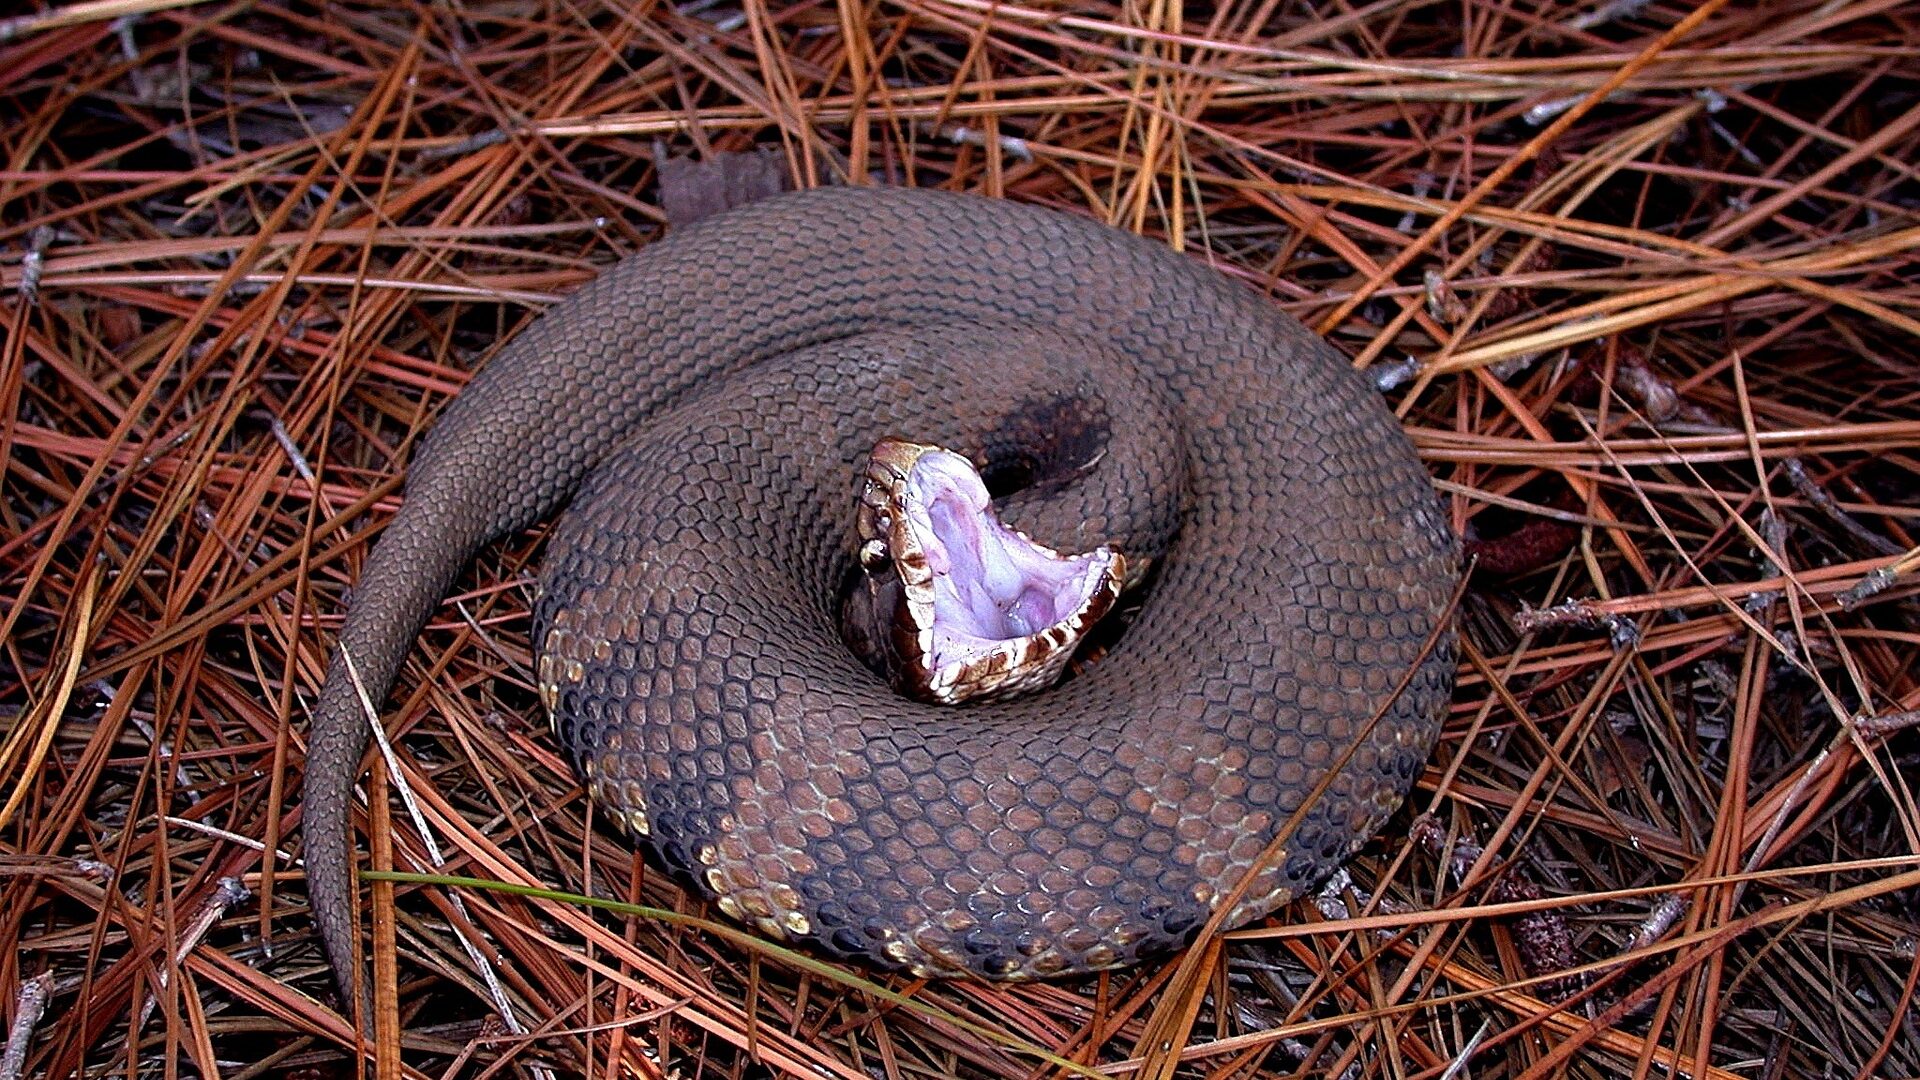 snakes water moccasin cottonmouth